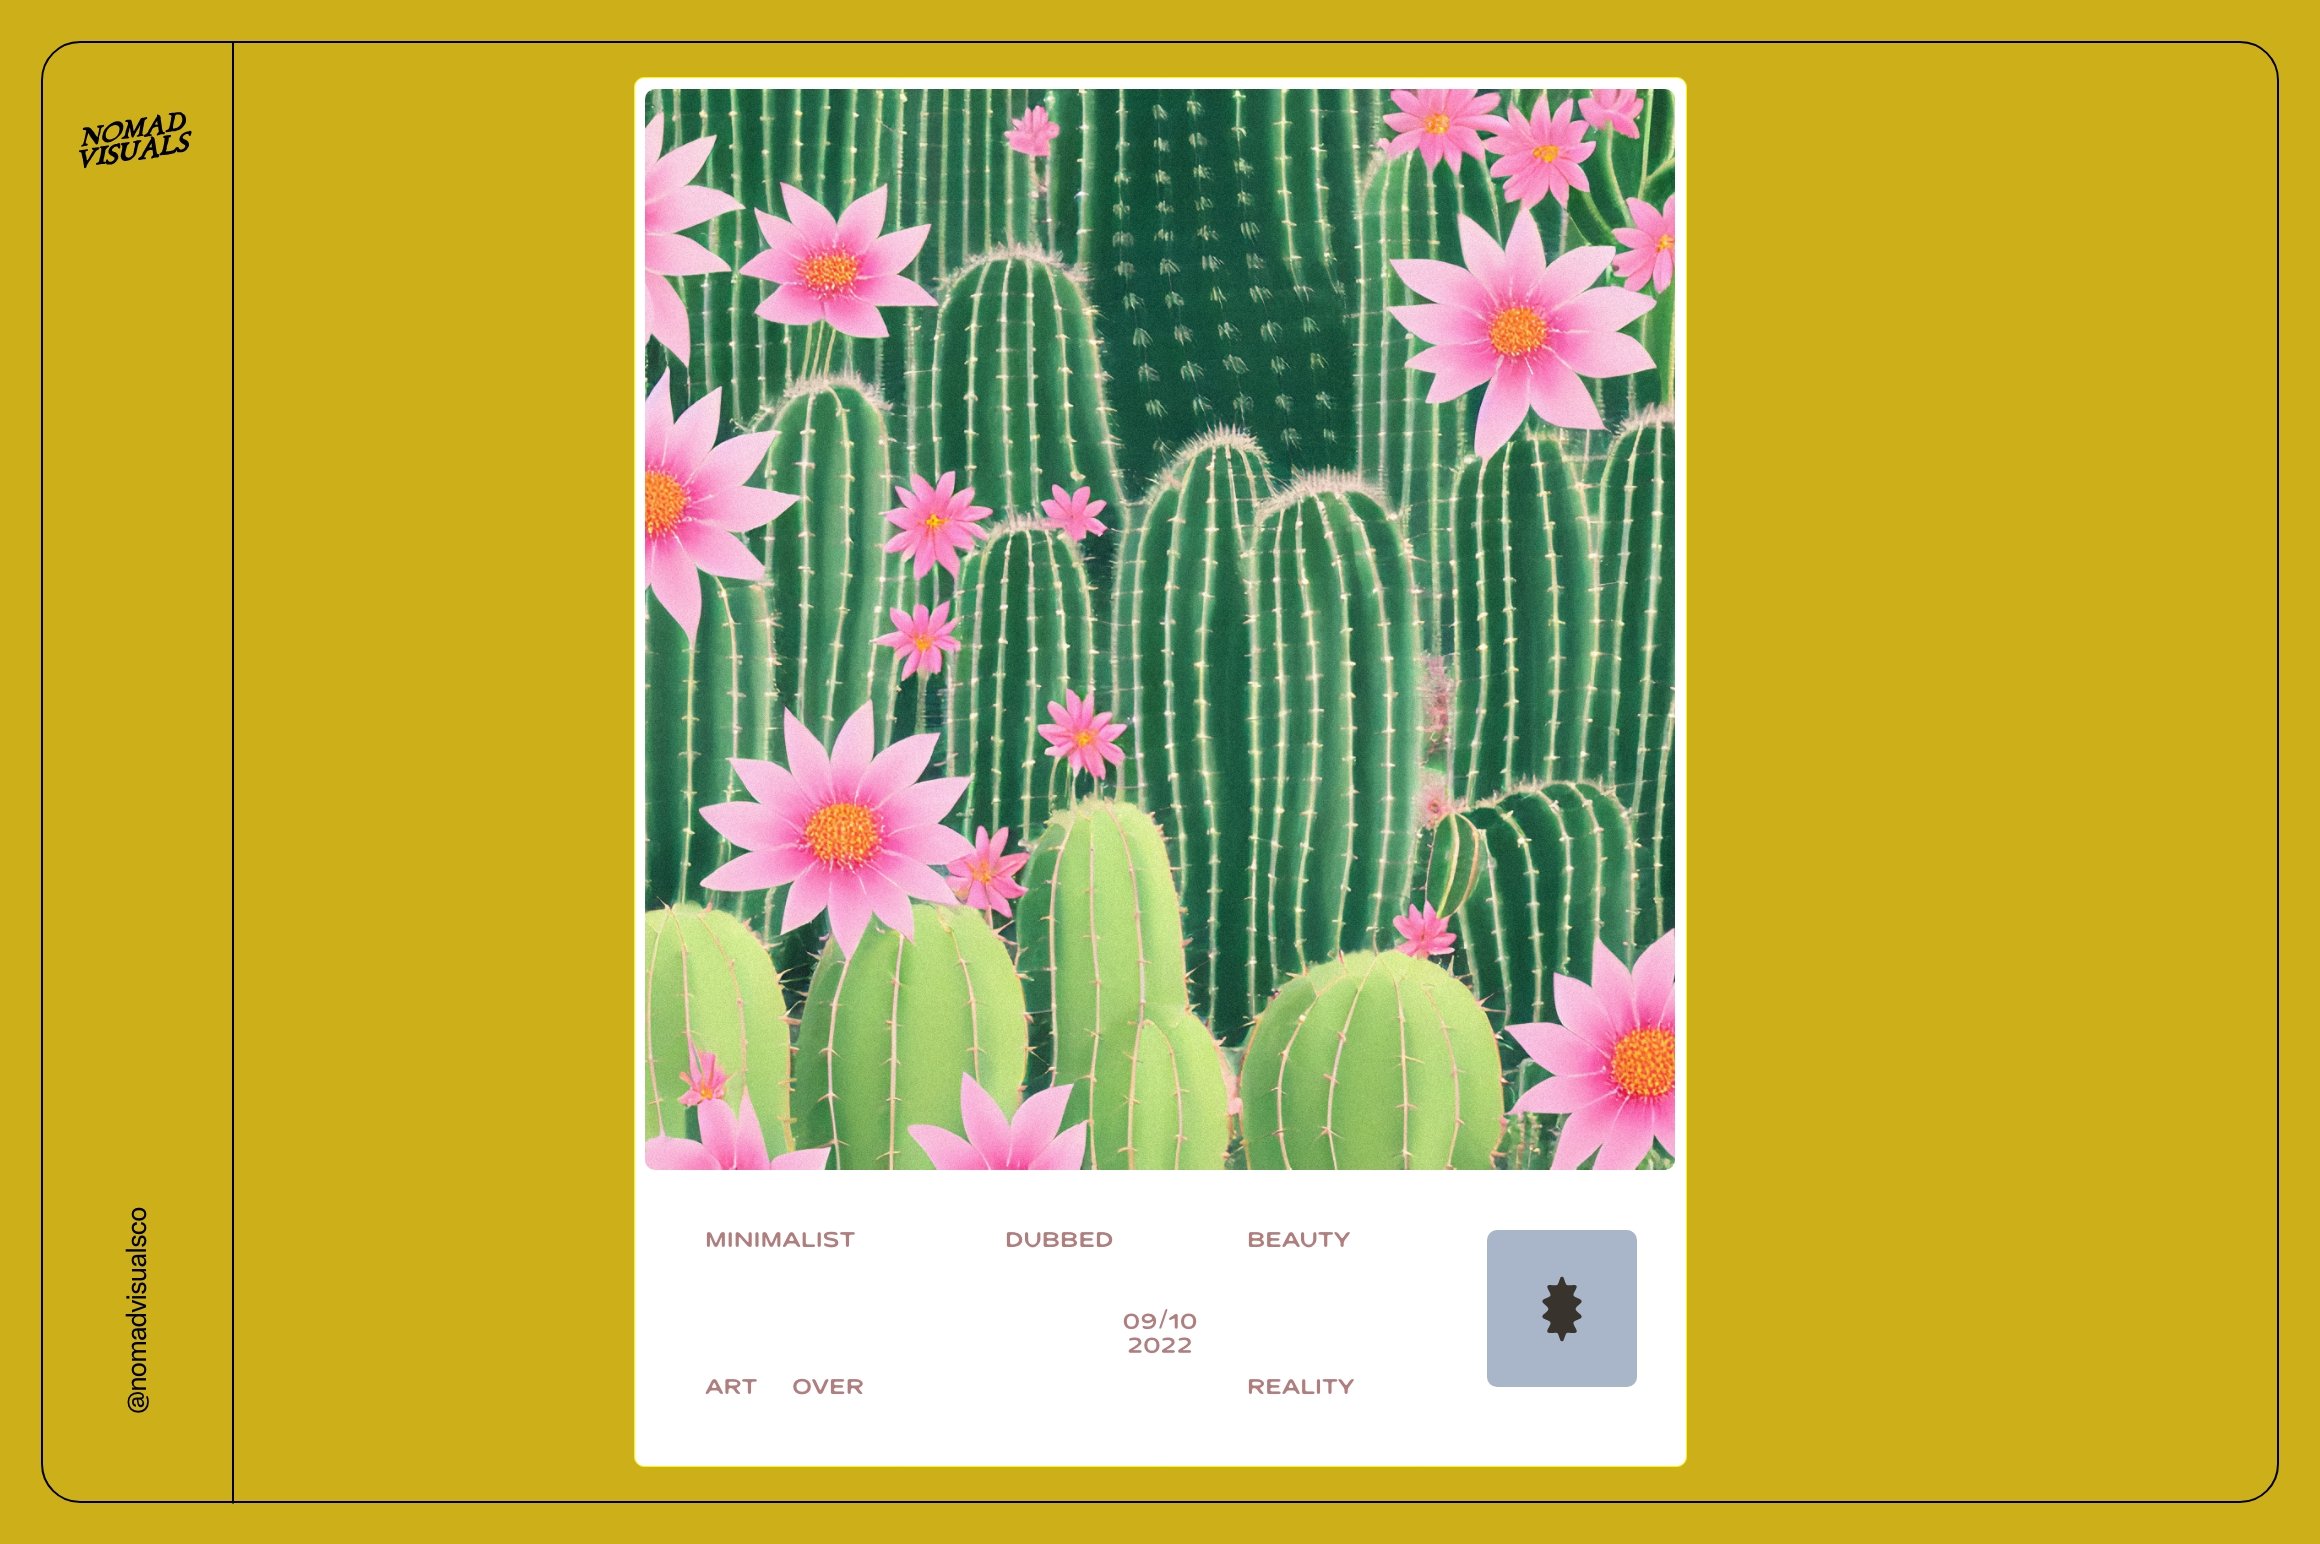 Picture of a cactus with pink flowers.